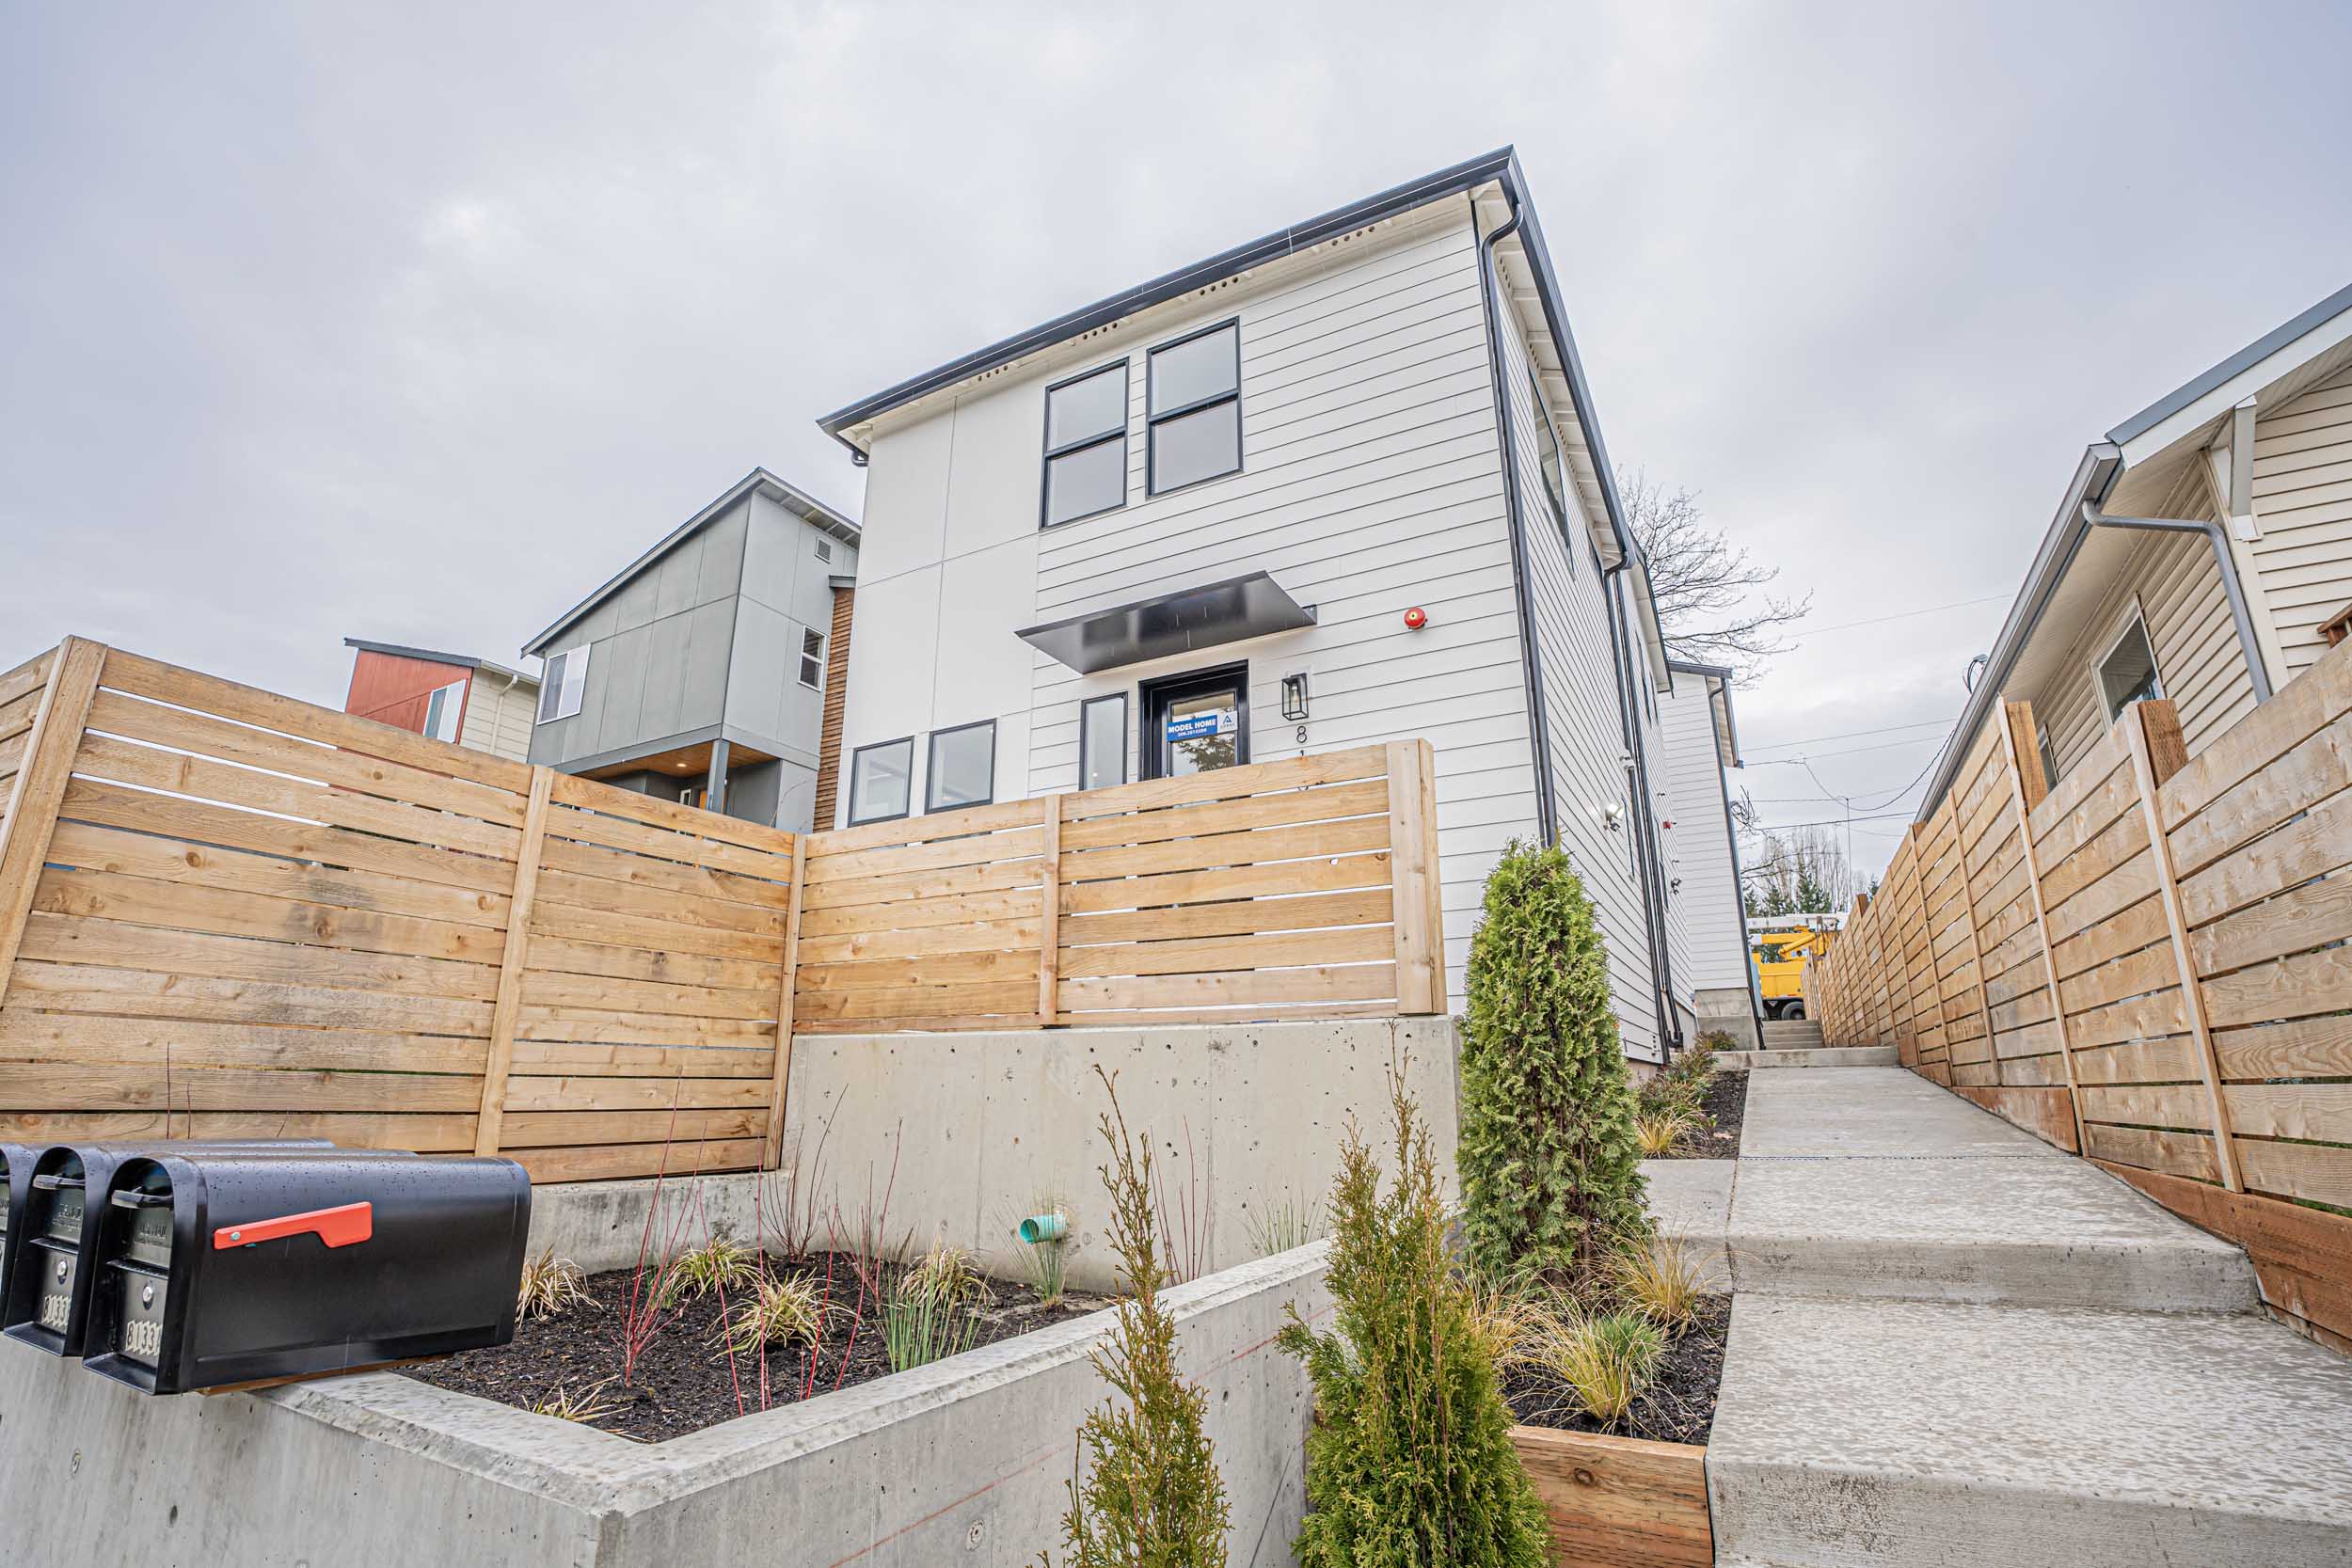 Exterior photos of a brand new SFR (Unit A) construction located at 8133 18th Ave SW Seattle, WA 98106